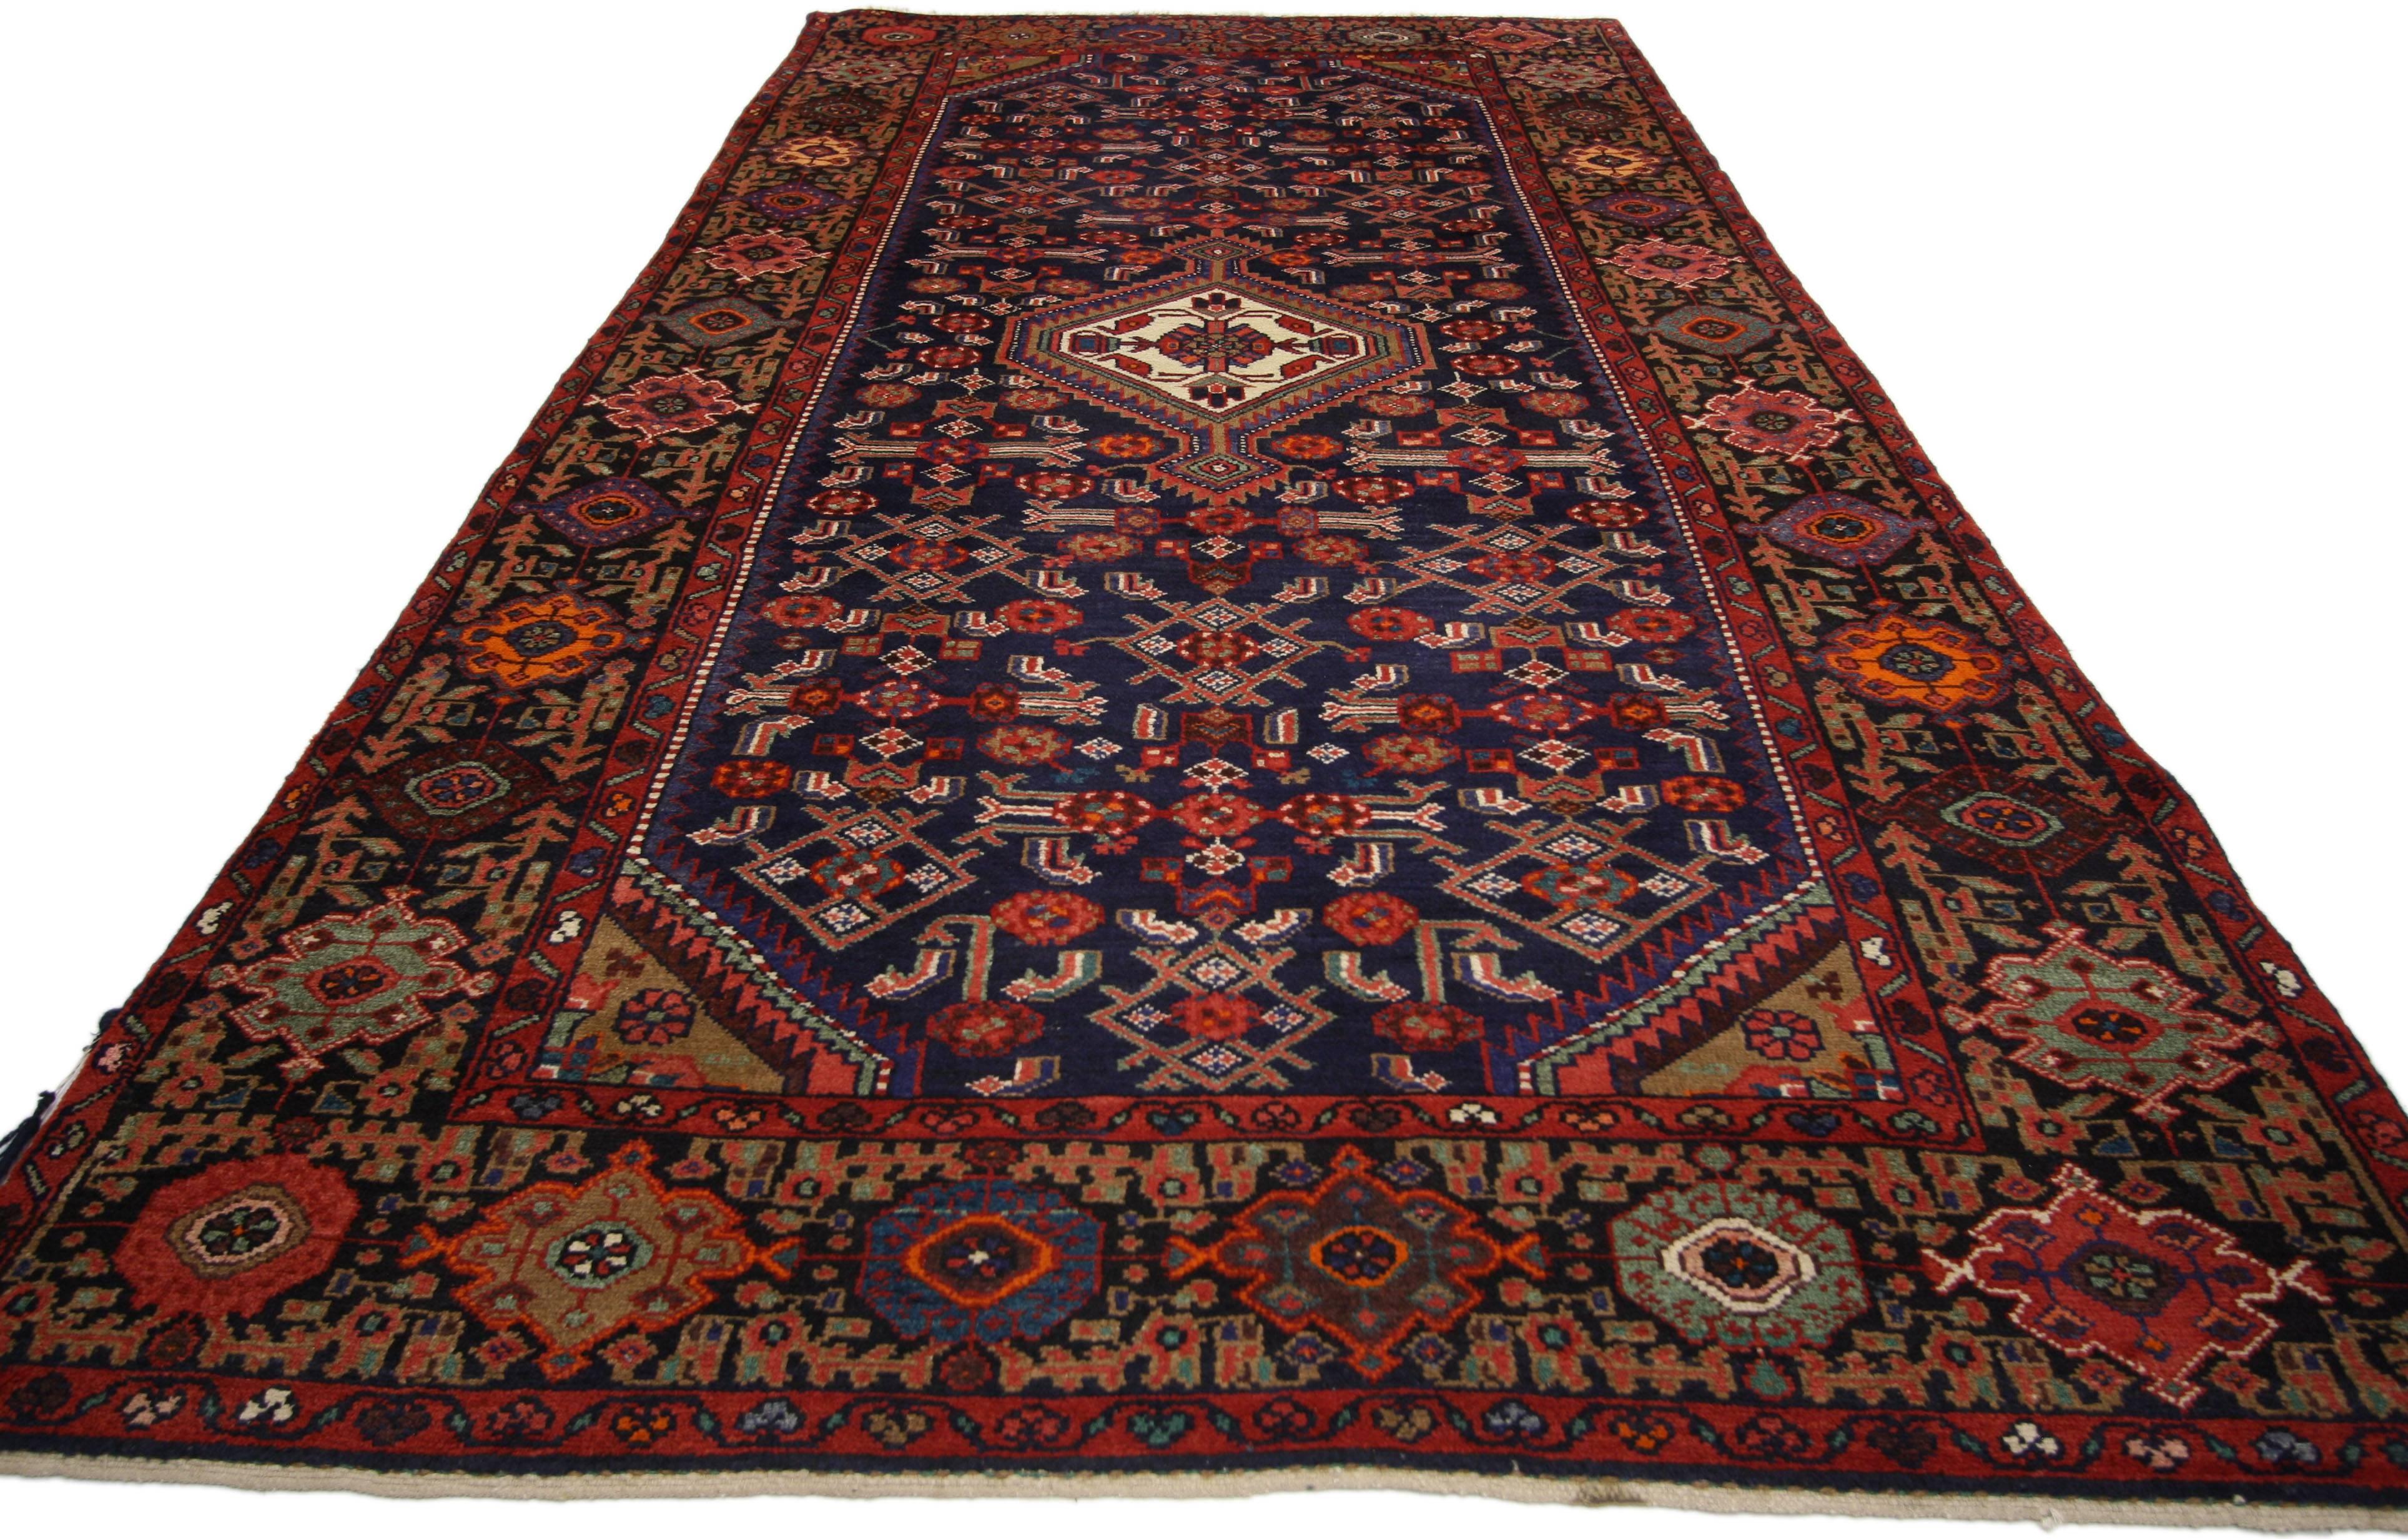 76023, vintage Persian Malayer-Hamadan gallery rug with traditional style - Wide Hallway runner. This hand-knotted wool vintage Persian Malayer-Hamadan gallery rug features a centre diamond medallion and all-over Herati pattern on an ink blue